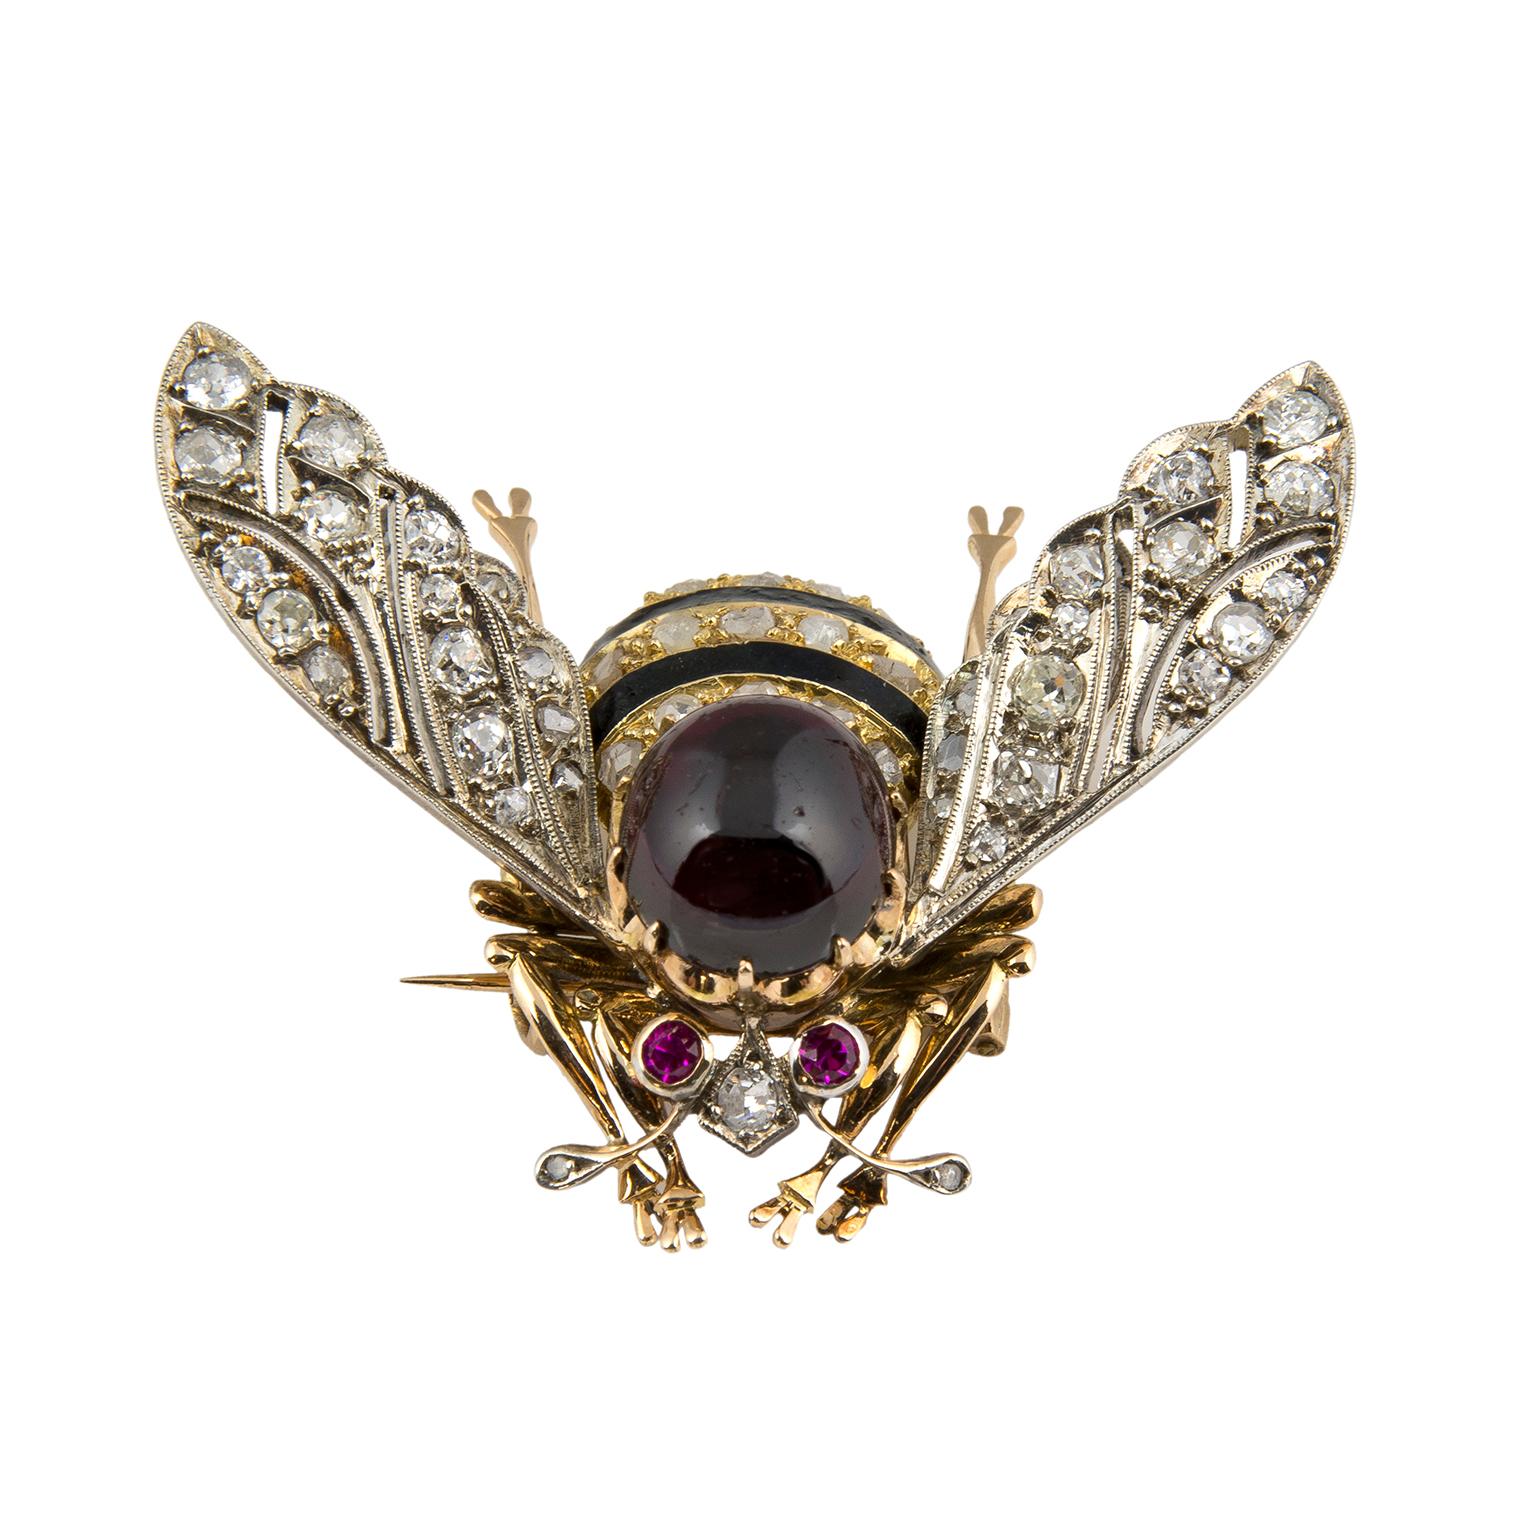 Vintage brooch in the shape of a bumblebee, in 18 Karat white gold-topped yellow gold, set with a garnet, black enamel, 1.60 carats in diamonds and two rubies.